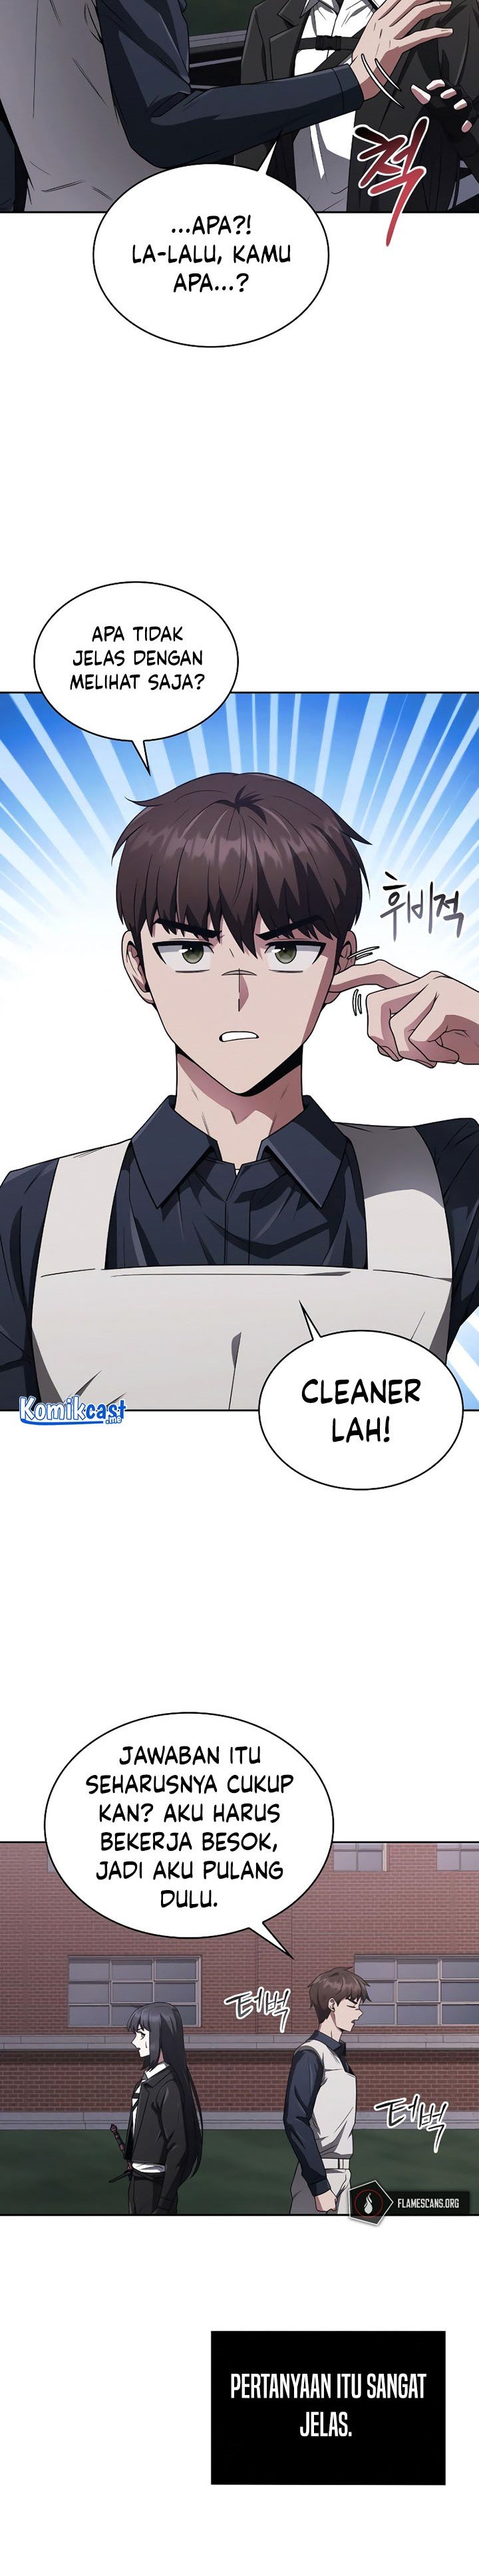 Clever Cleaning Life Of The Returned Genius Hunter Chapter 07 - 235